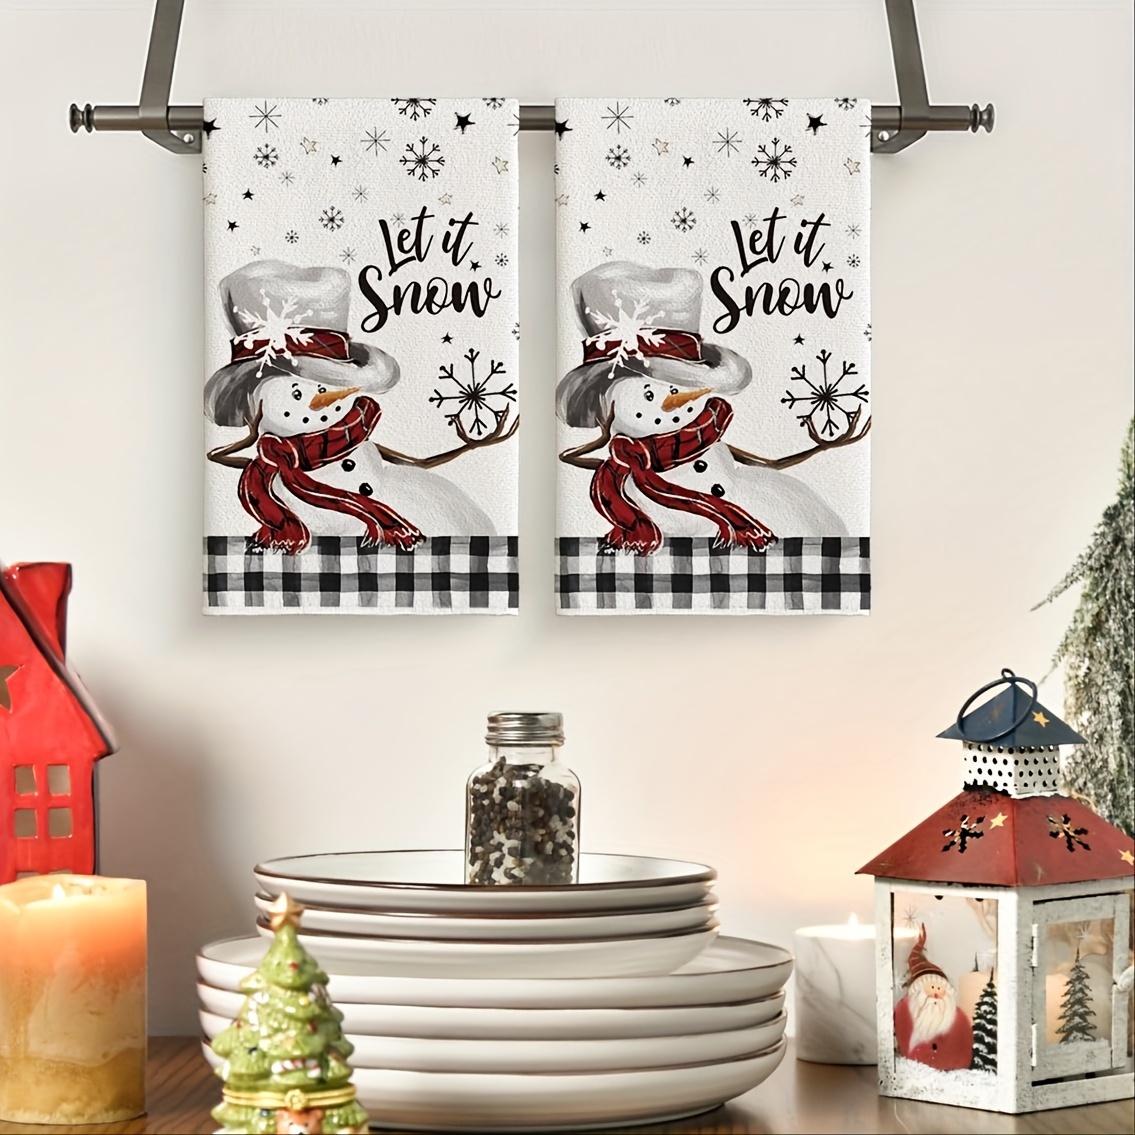 Kitchen Towel Soft Do the Dishes Merry Christmas Snowman Dish